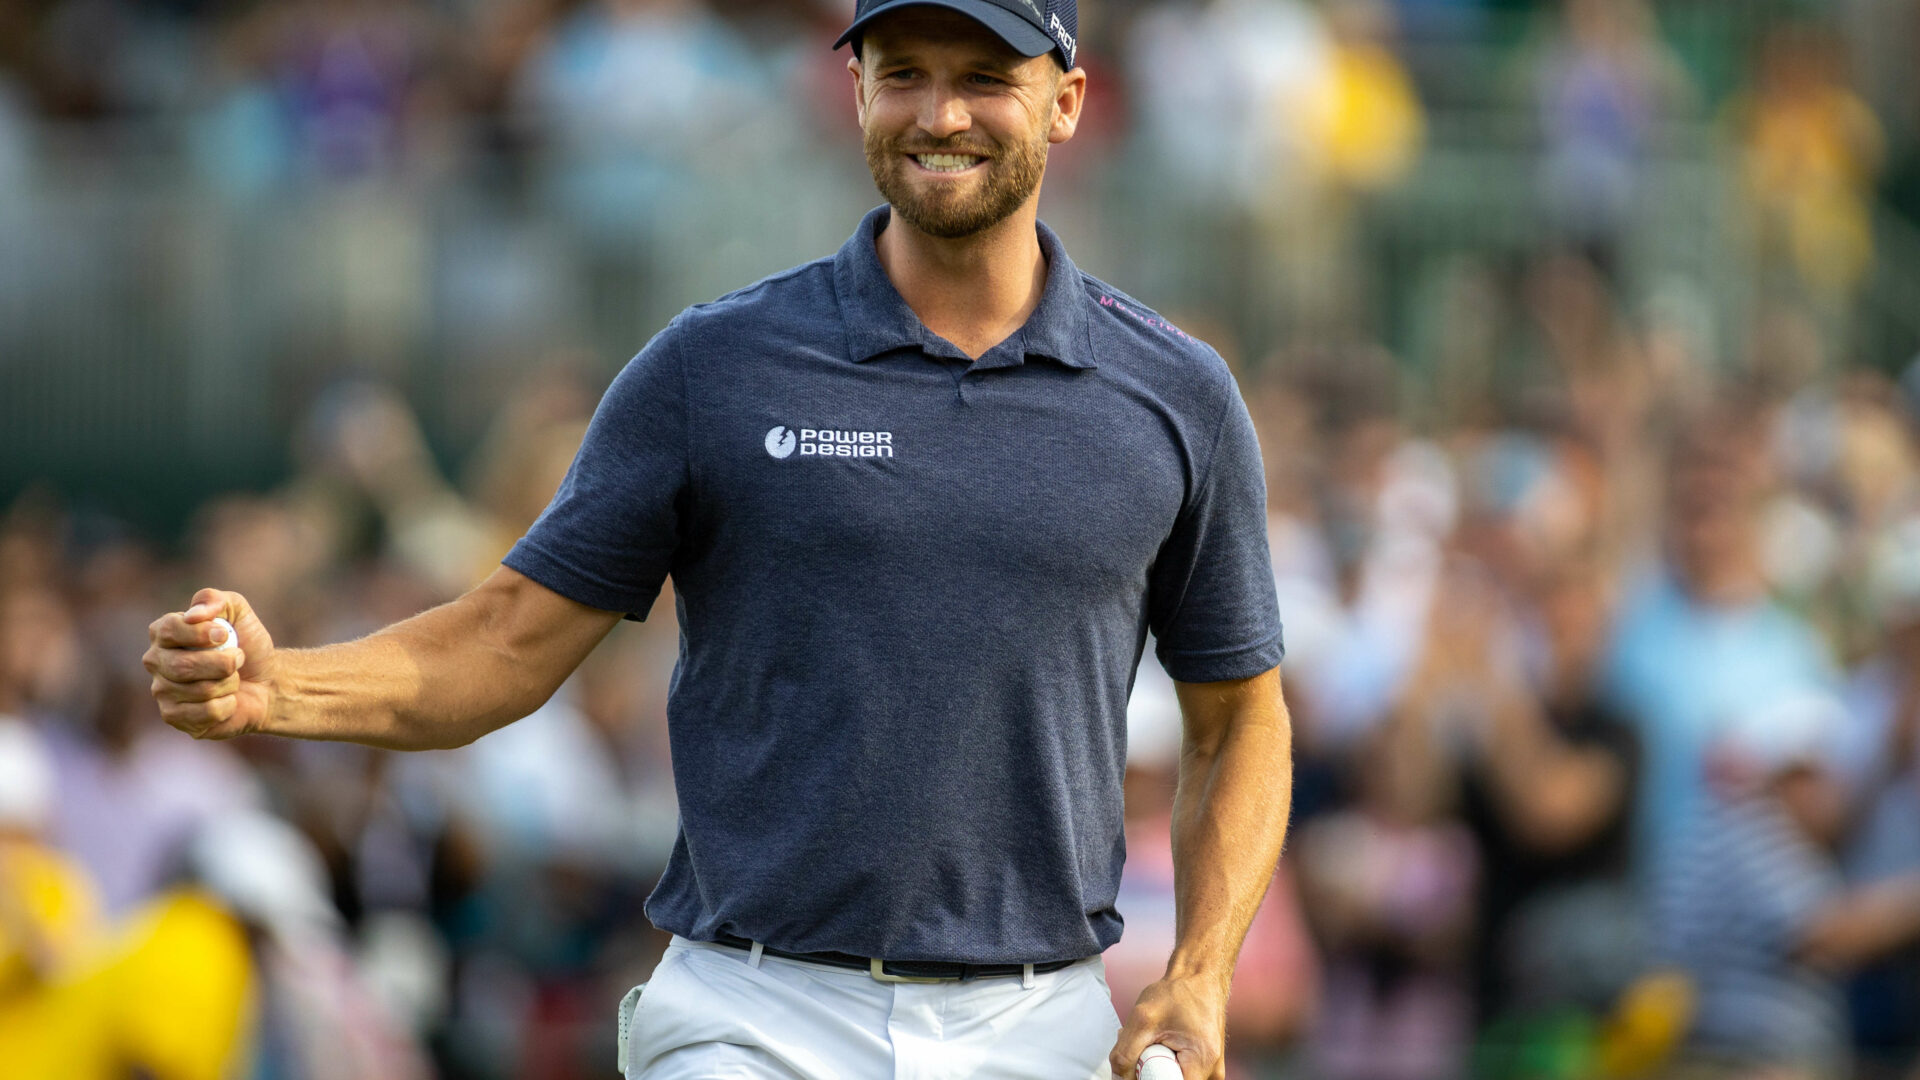 CHARLOTTE, NC - MAY 7: Wyndham Clark immediately celebrates after making his final putt on the 18th hole during the Final Round at the Wells Fargo Championship at Quail Hollow Golf Club on May 7, 2023 in Charlotte, North Carolina. (Photo by Eston Parker/ISI Photos/Getty Images). tour news